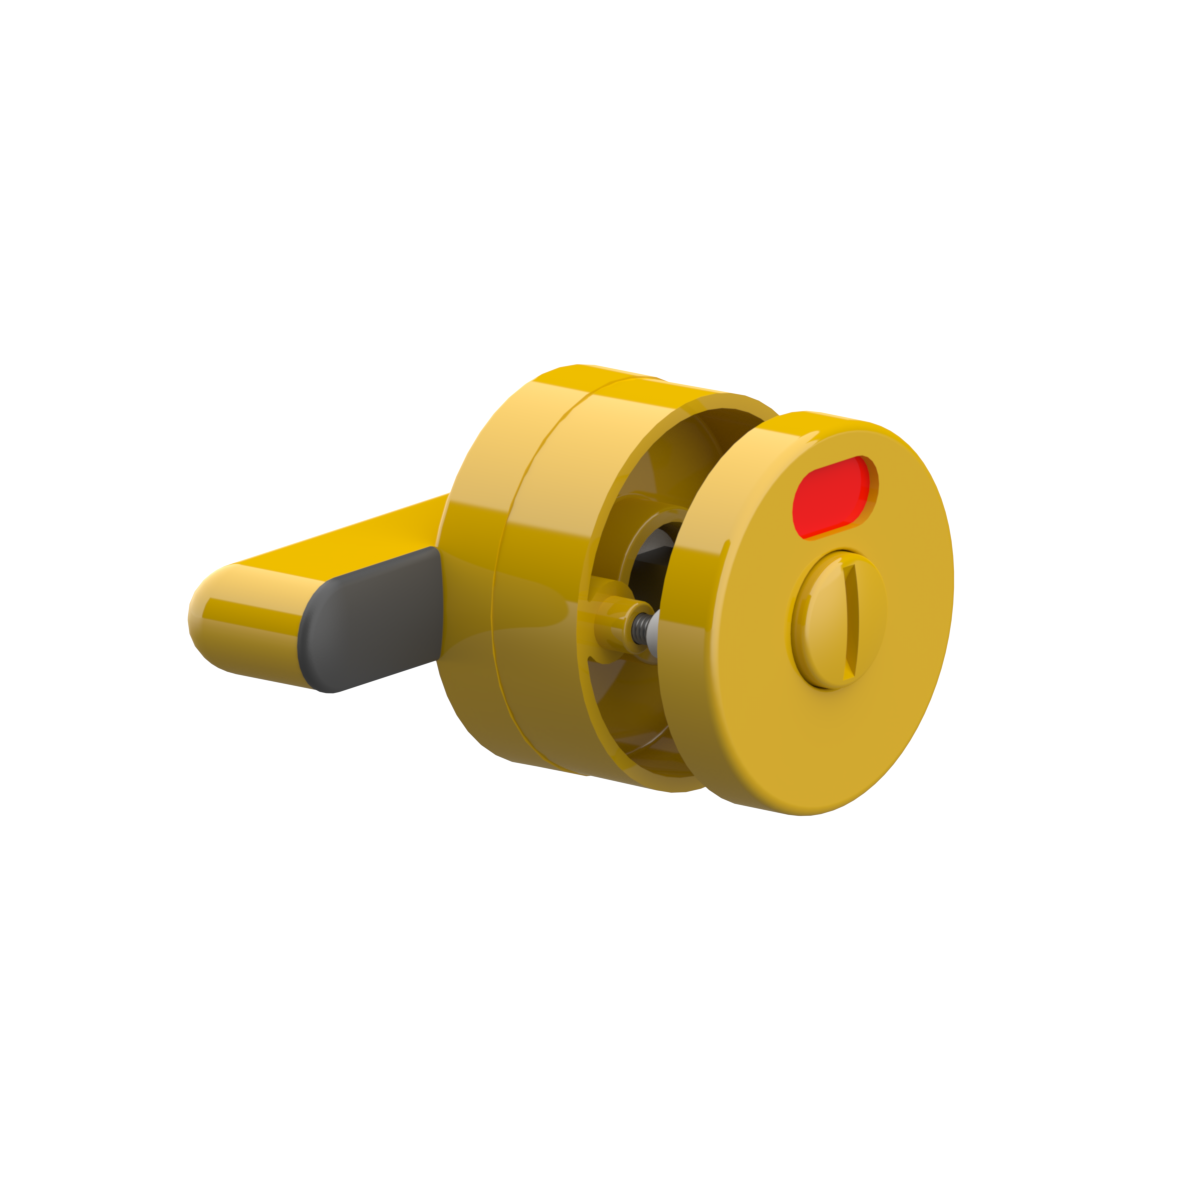 Nylon Partition Door Lock NY.TWR 840.03, with distance piece, 14 mm, 80 x 85 x 52 mm, Yellow